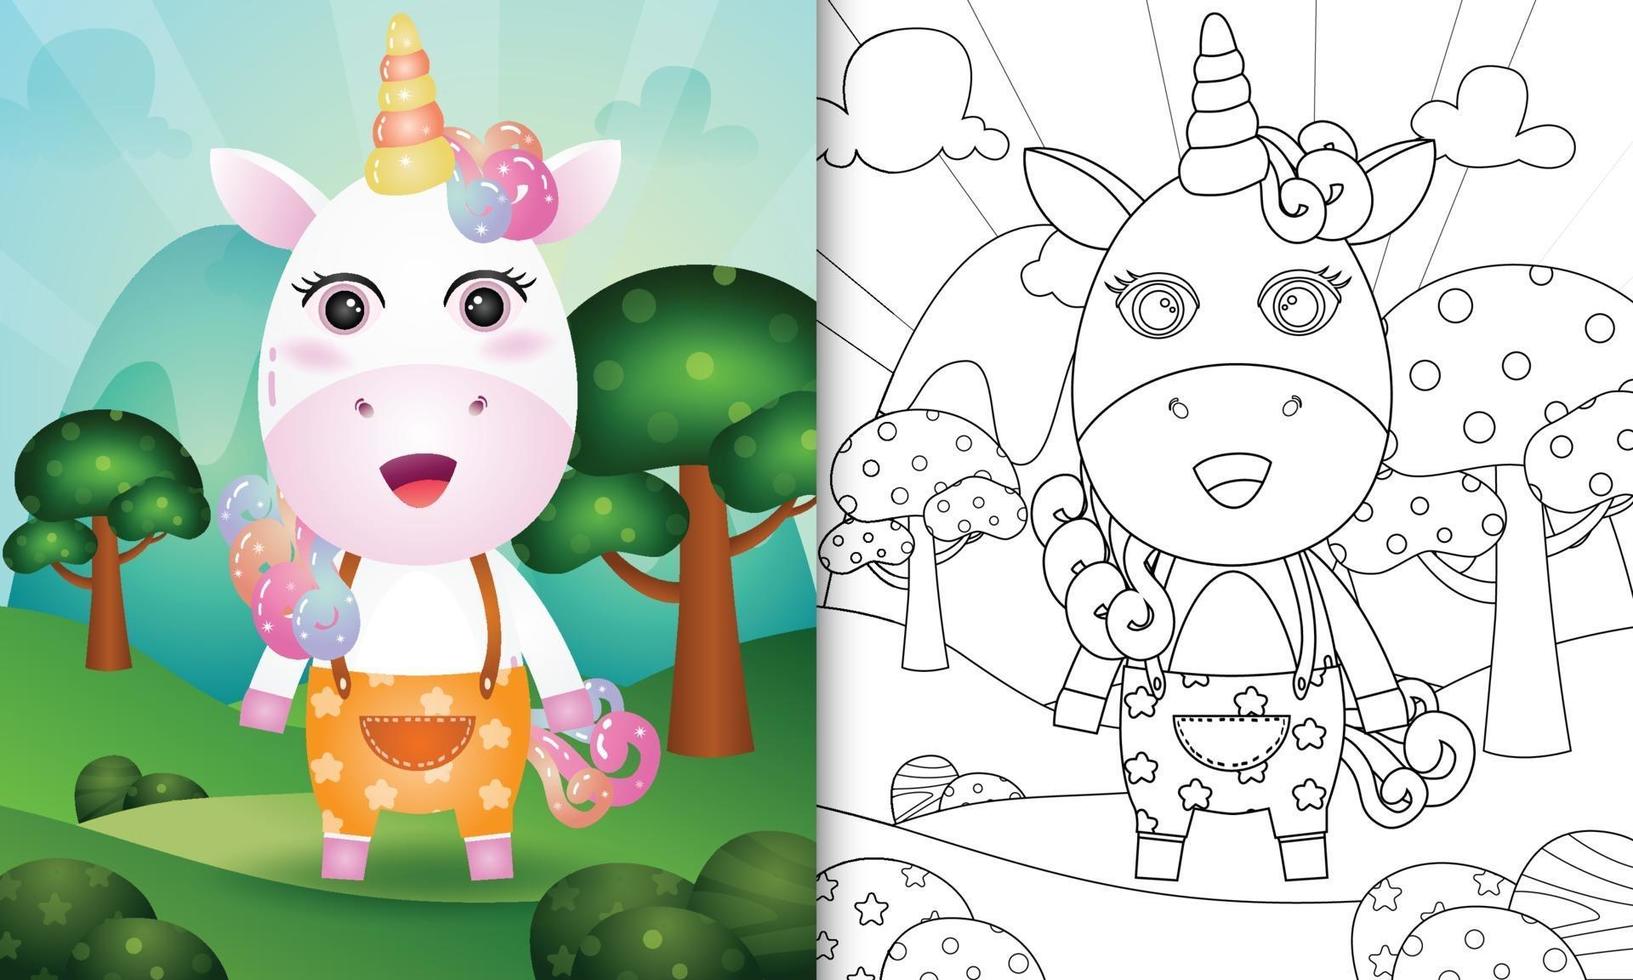 Coloring book template for kids with a cute unicorn character illustration vector